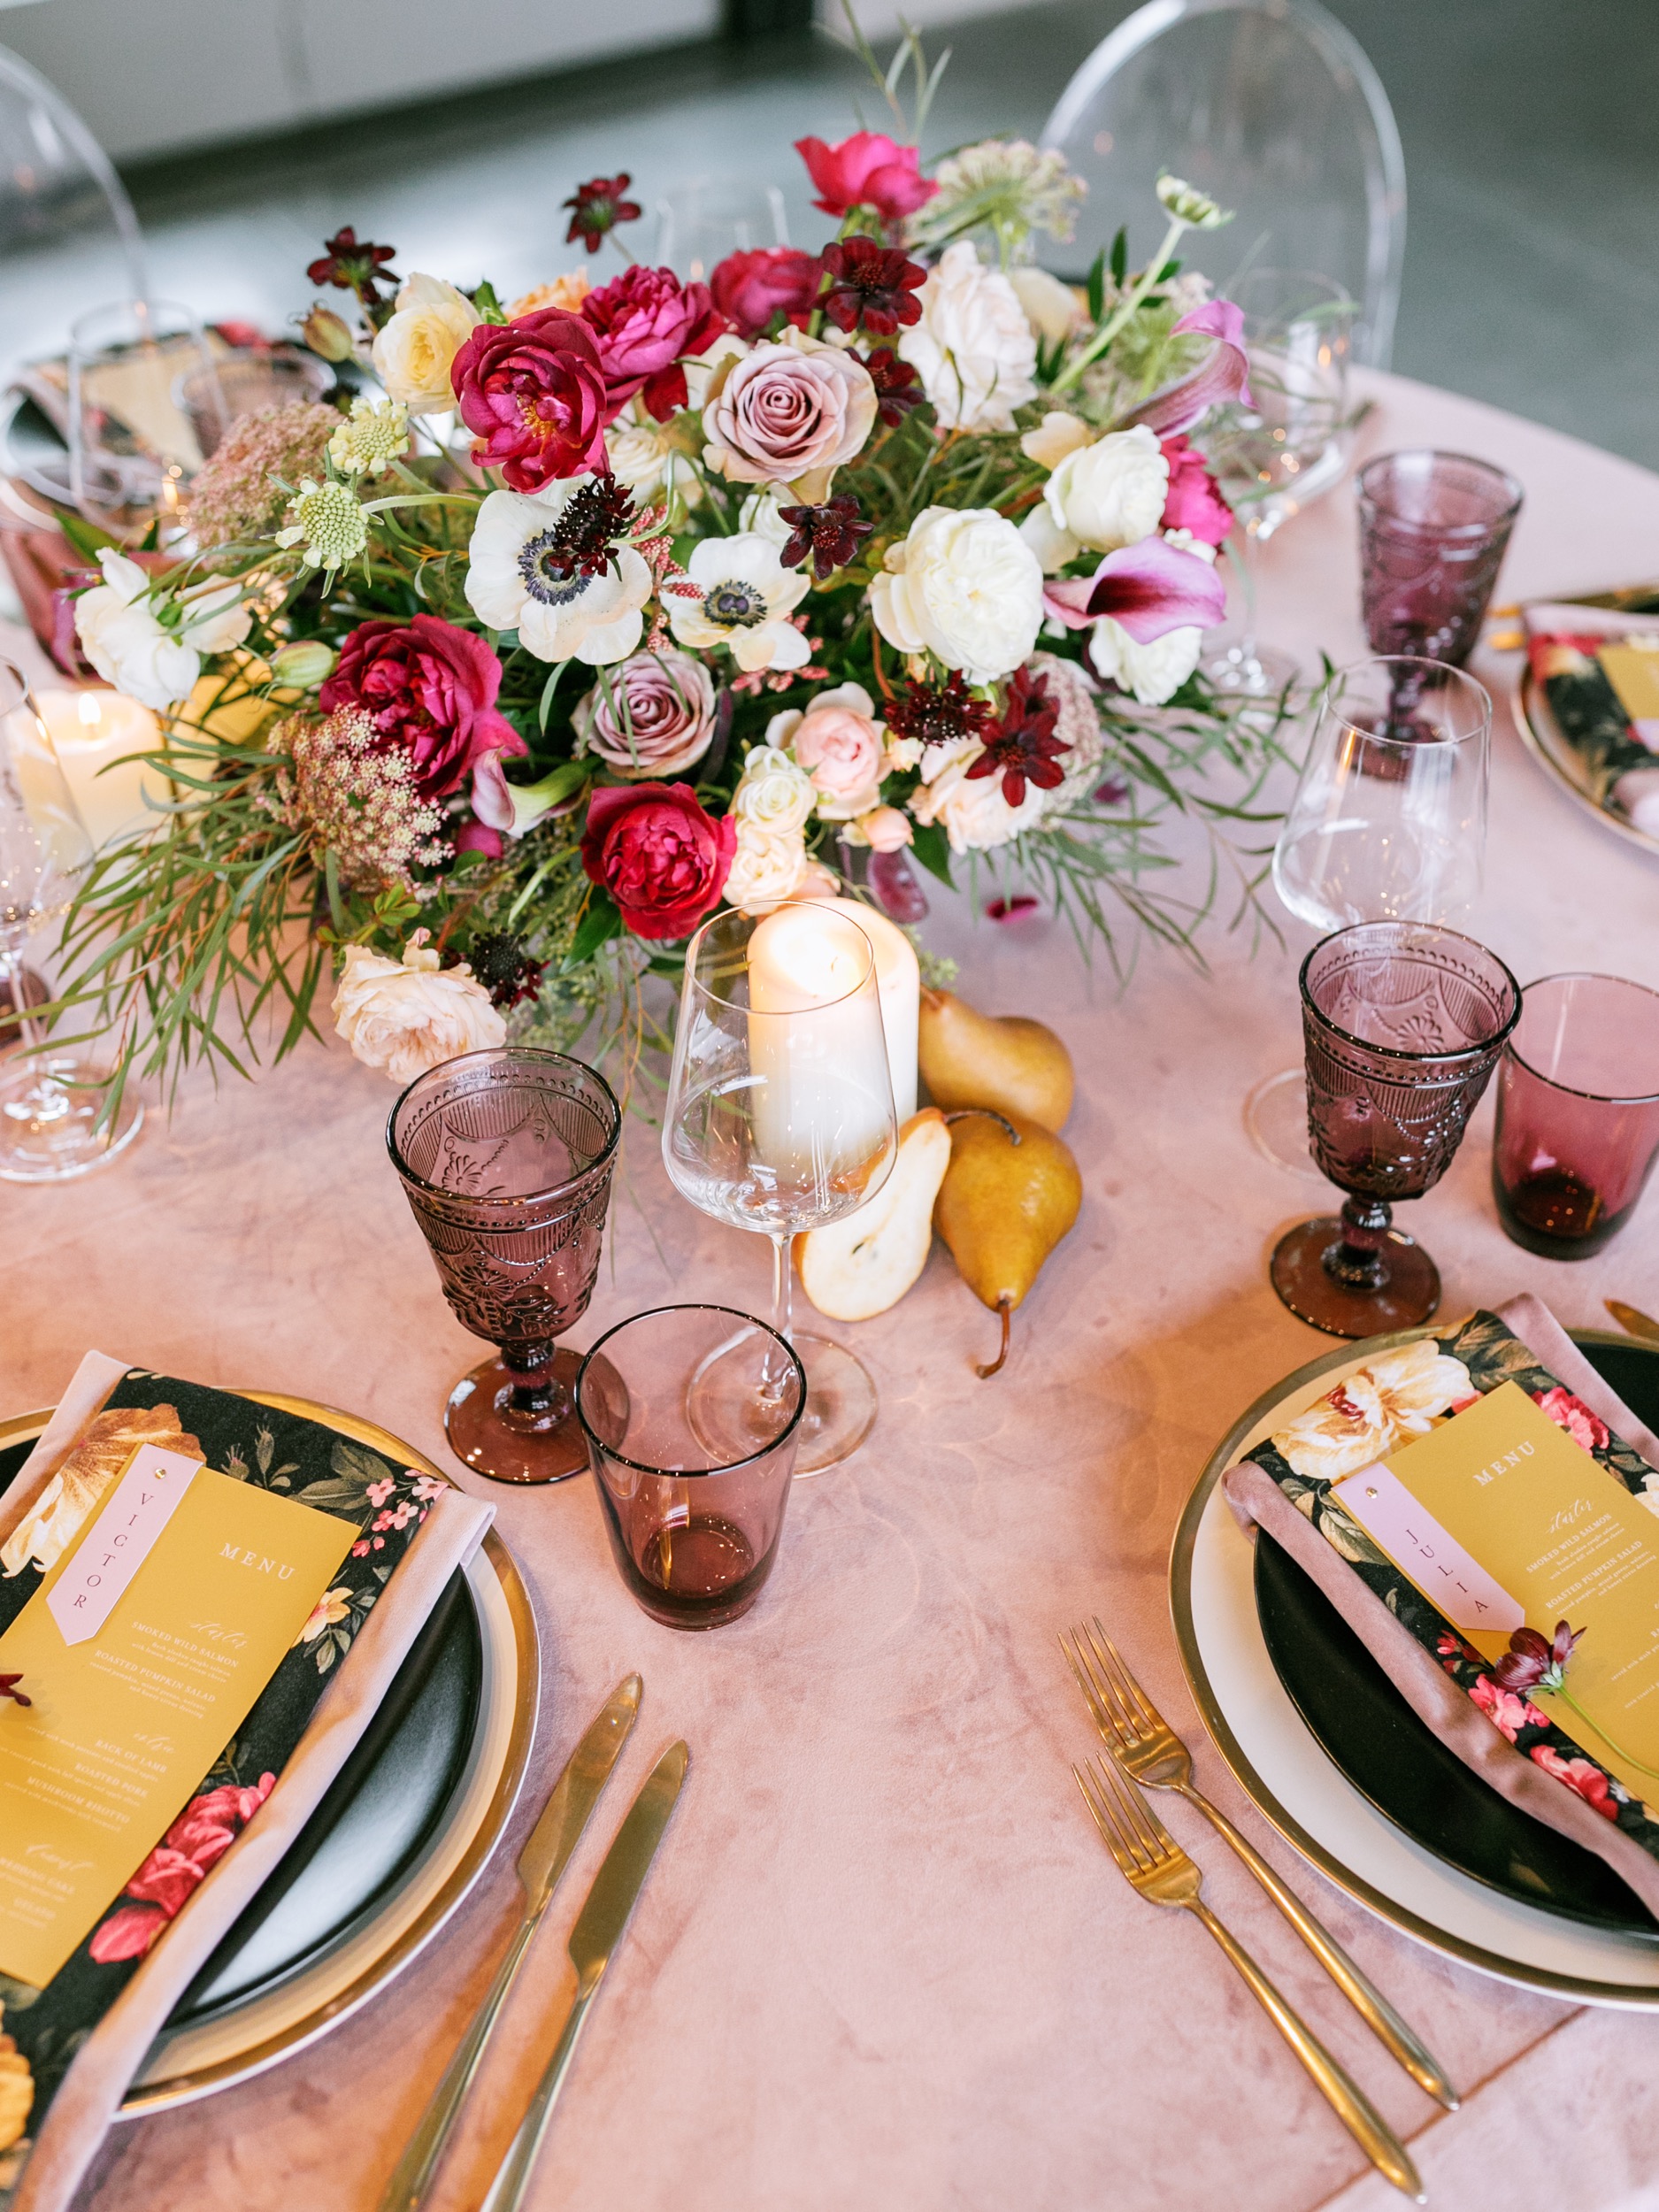 Blush and Romantic Wedding Table with White and Gold Plates topped with Modern Black Plates, Sleek Gold Flatware and an Untamed Centerpiece with Cream and Deep Burgundy Flowers Surrounded by Pears and Candles